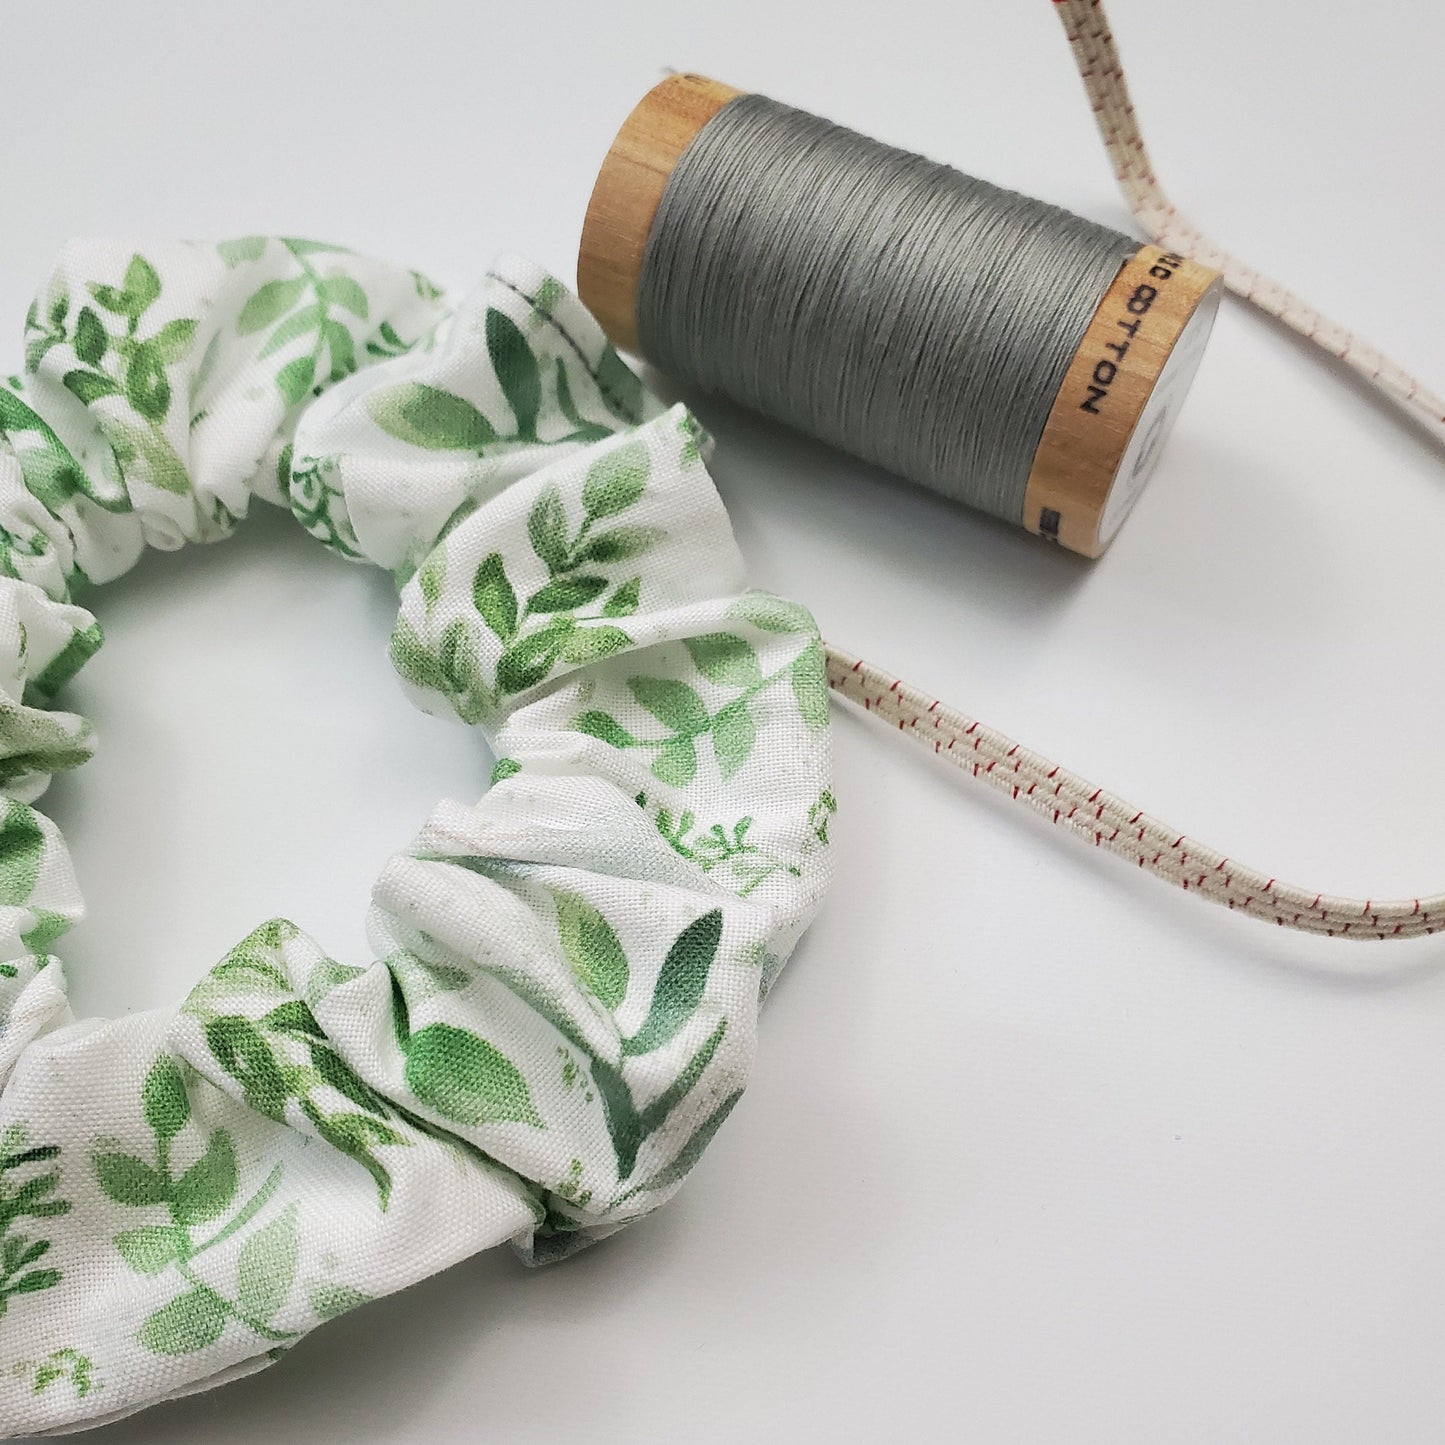 Scrunchie shown next to a wooden spool of grey thread, and a piece of the biodegradable elastic.